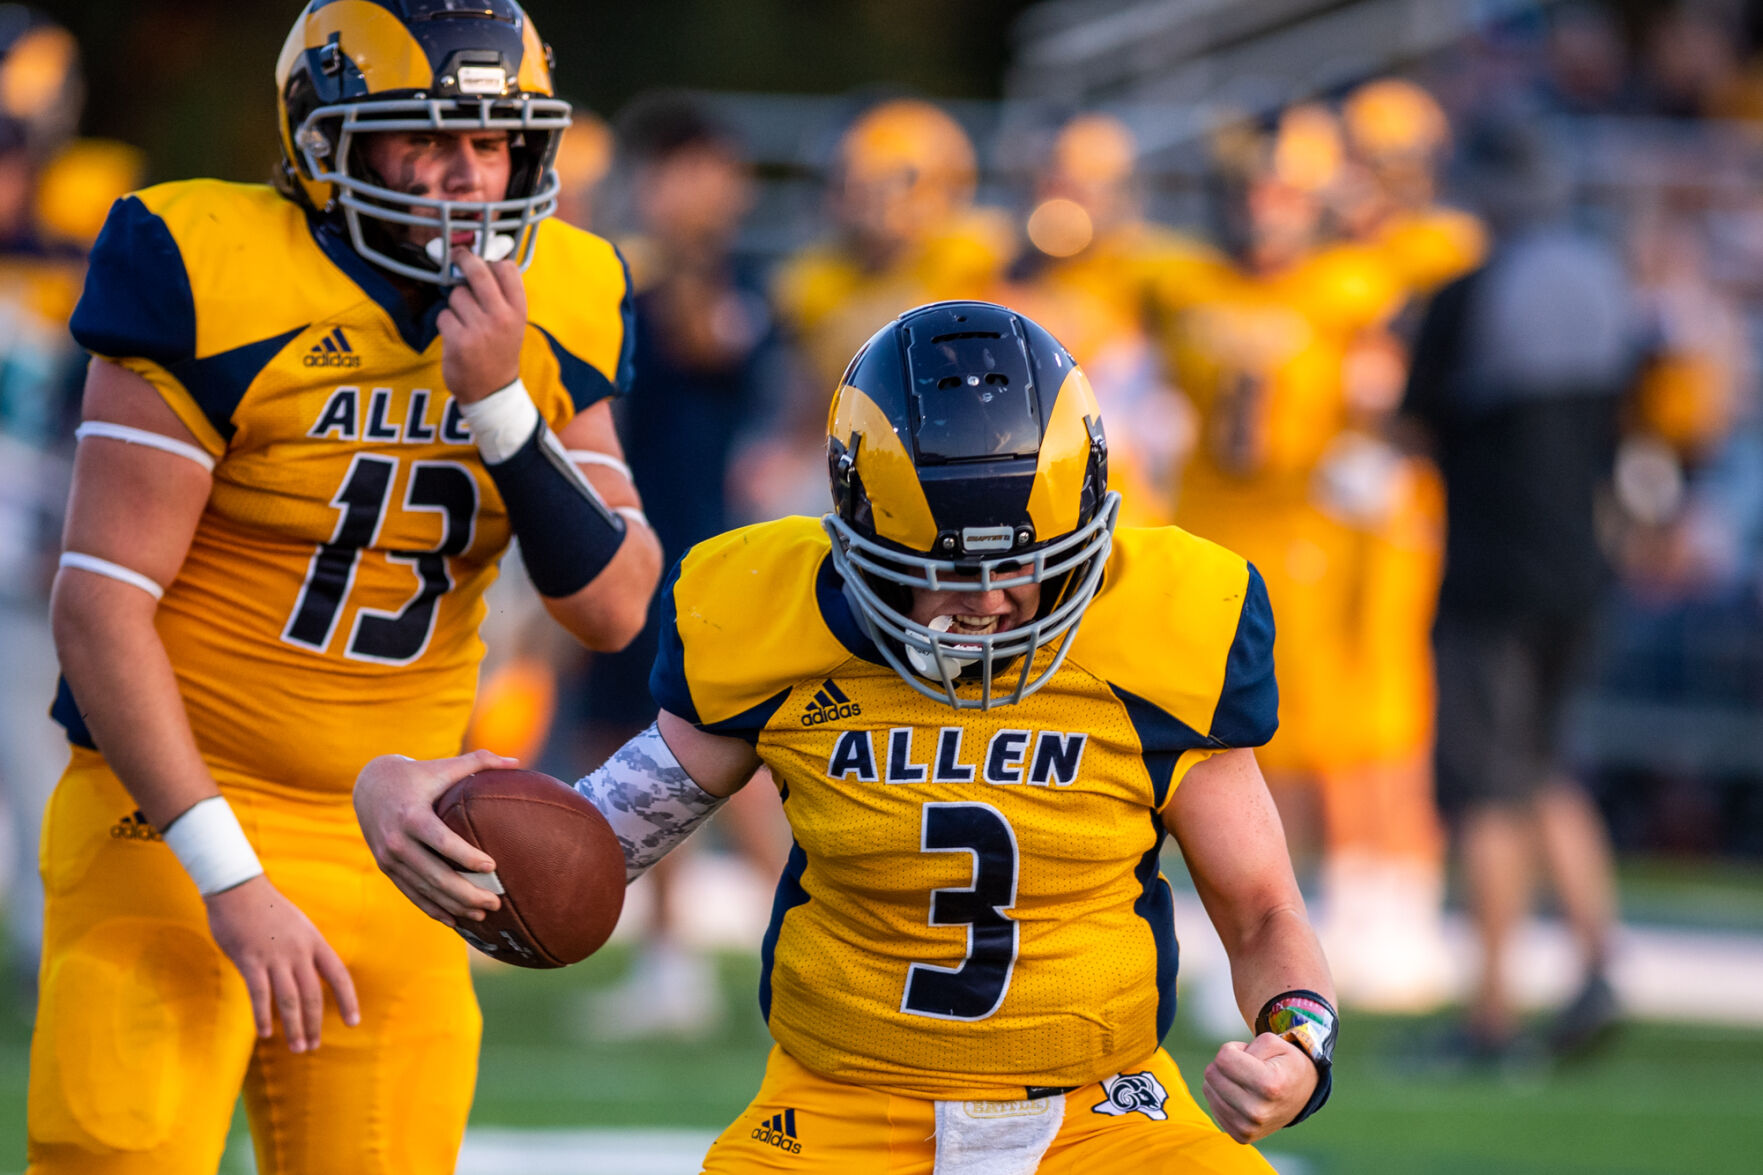 Allen Academy to begin broadcasting football games for free online